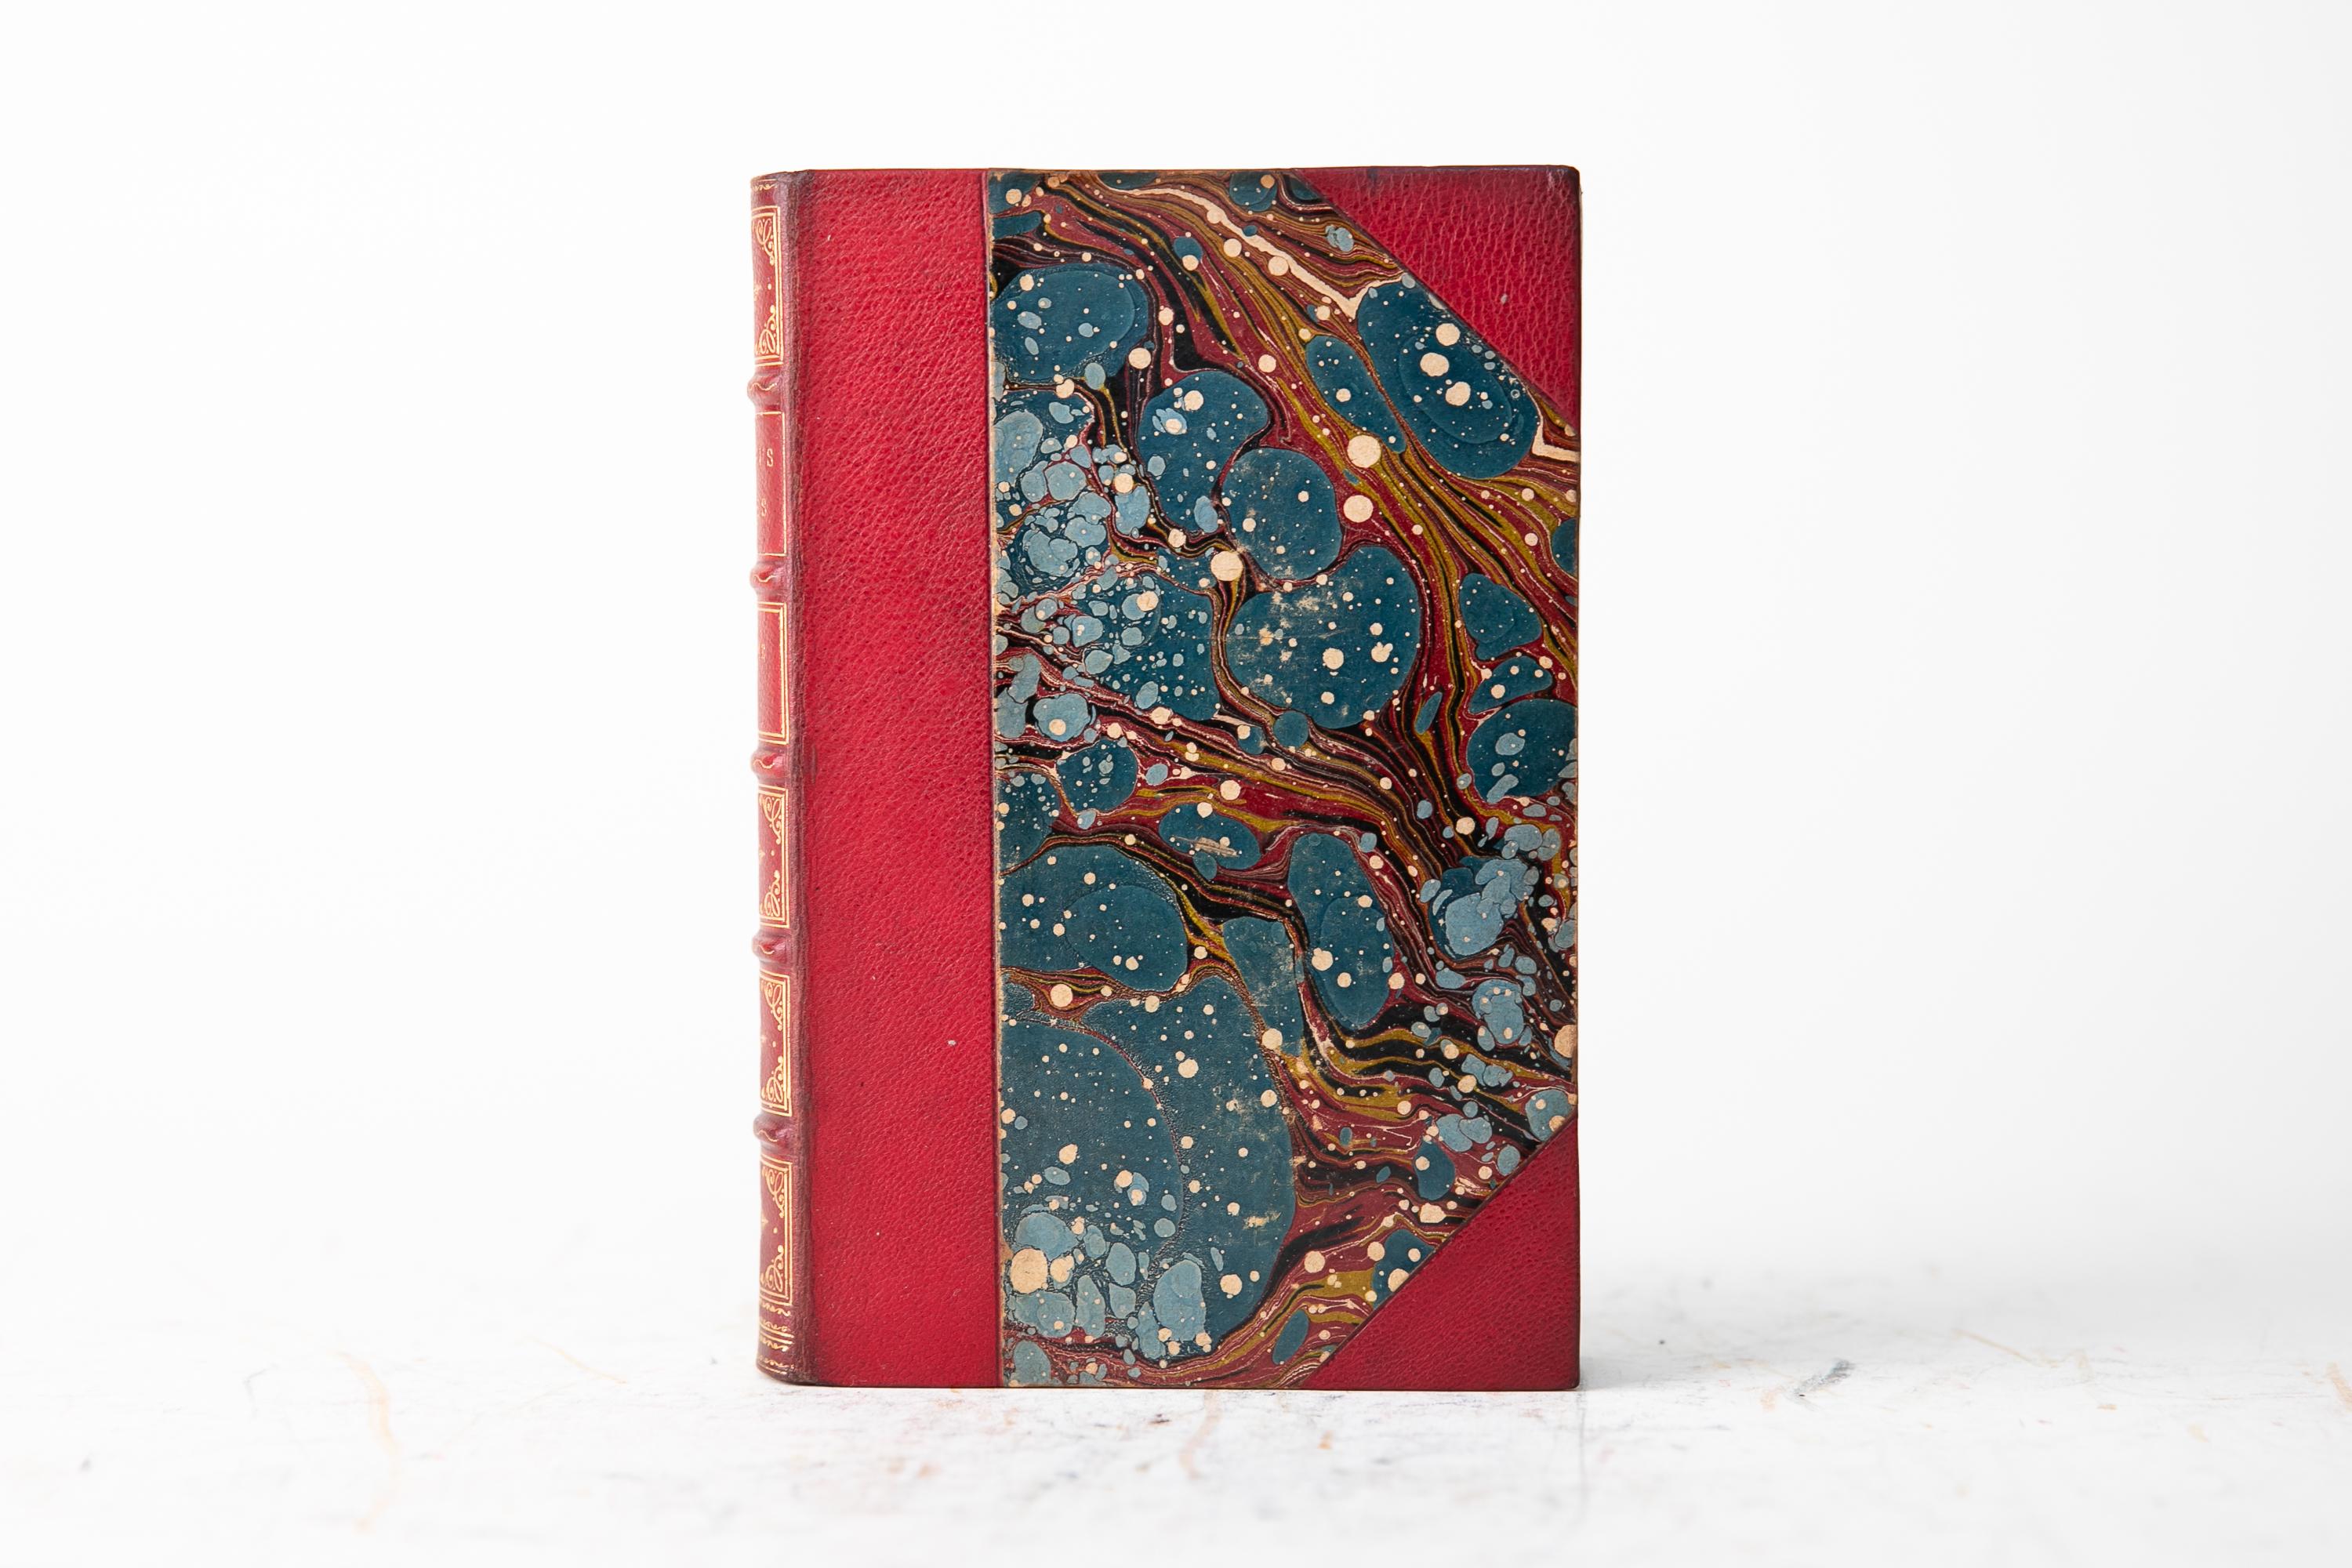 6 Volumes. Giorgio Vasari, Lives of the Most Eminent Painters, Sculptors, and Architects. Bound in 3.4 red morocco and marbled boars with the raised band spines gilt-tooled. Top edge gilt with marbled endpapers. With notes and illustrations by Mrs.